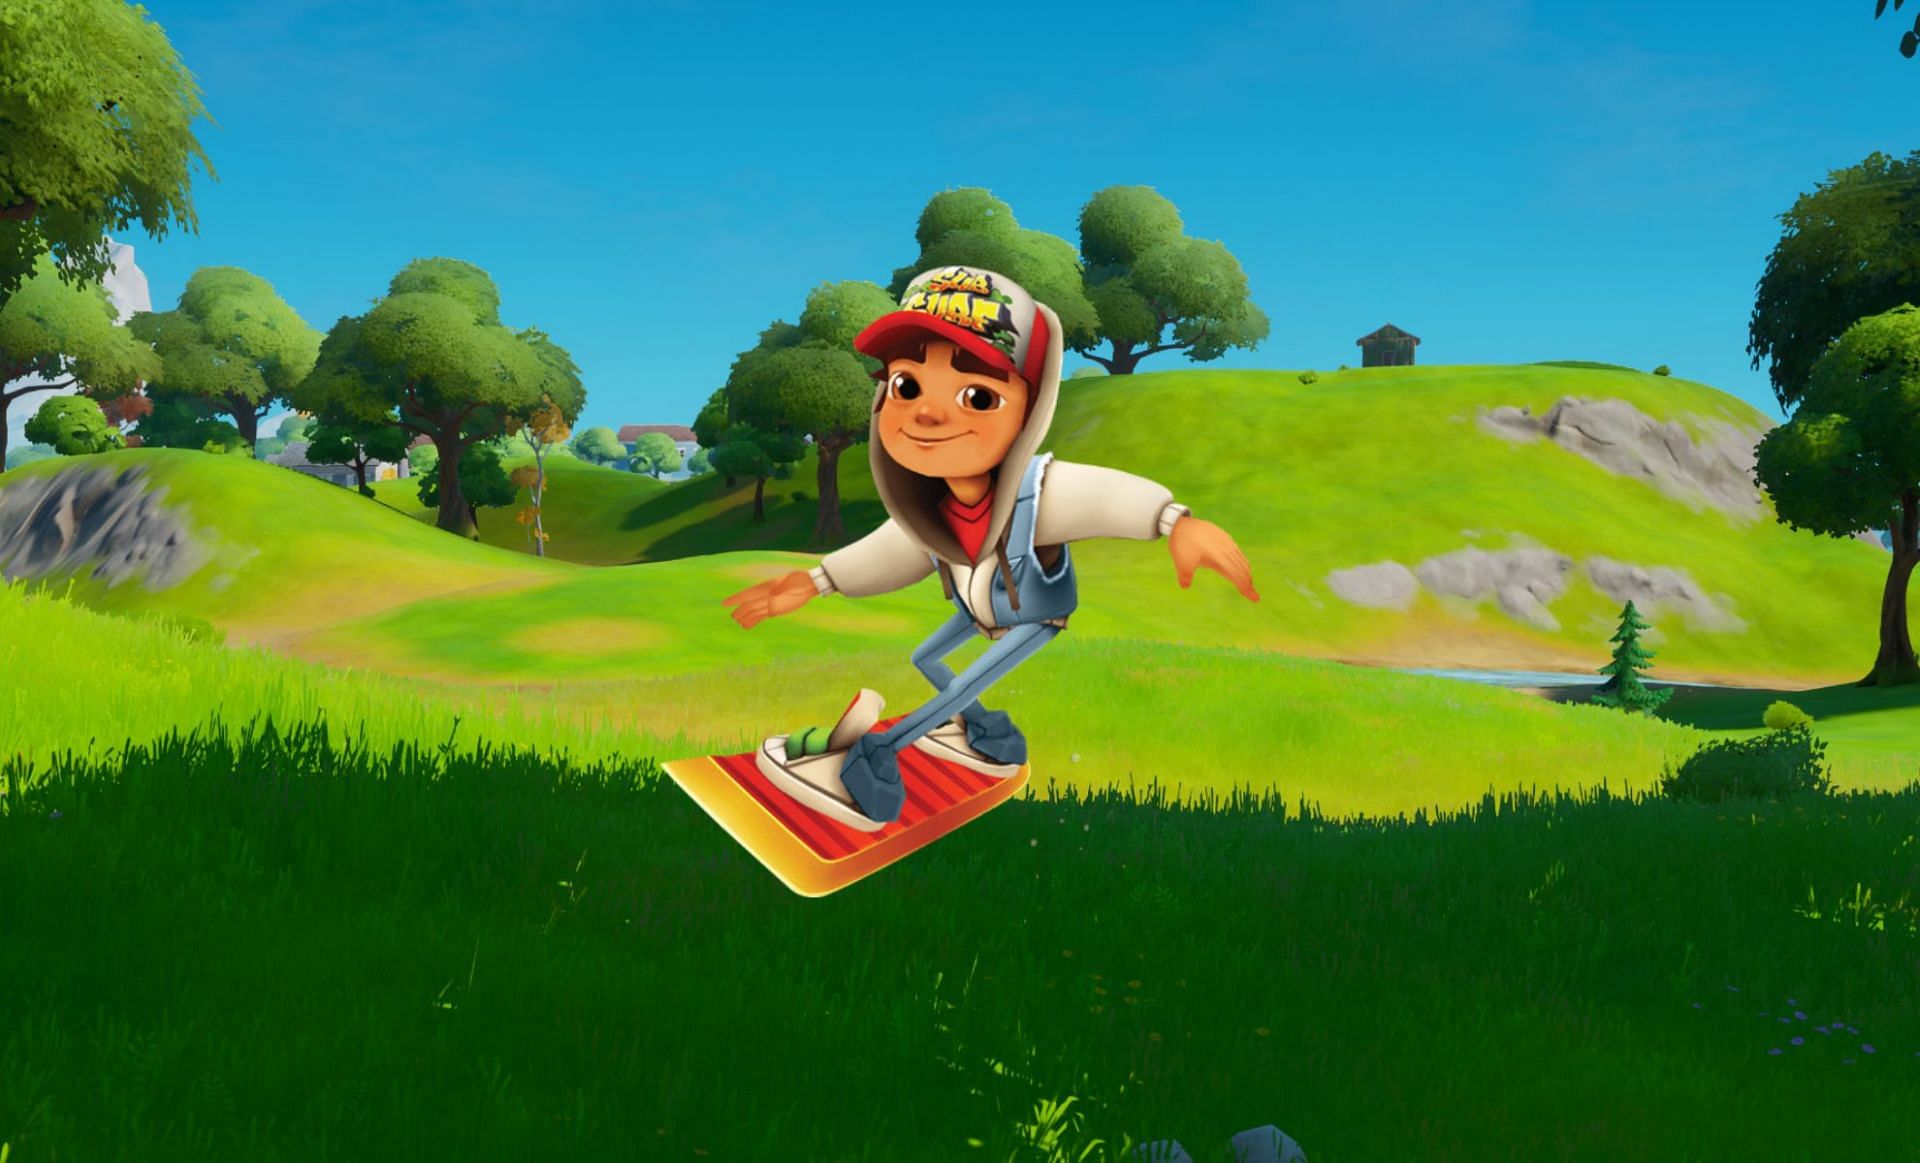 Subway Surfers brought into the world of Fortnite with a mod (Image via Pinterest)